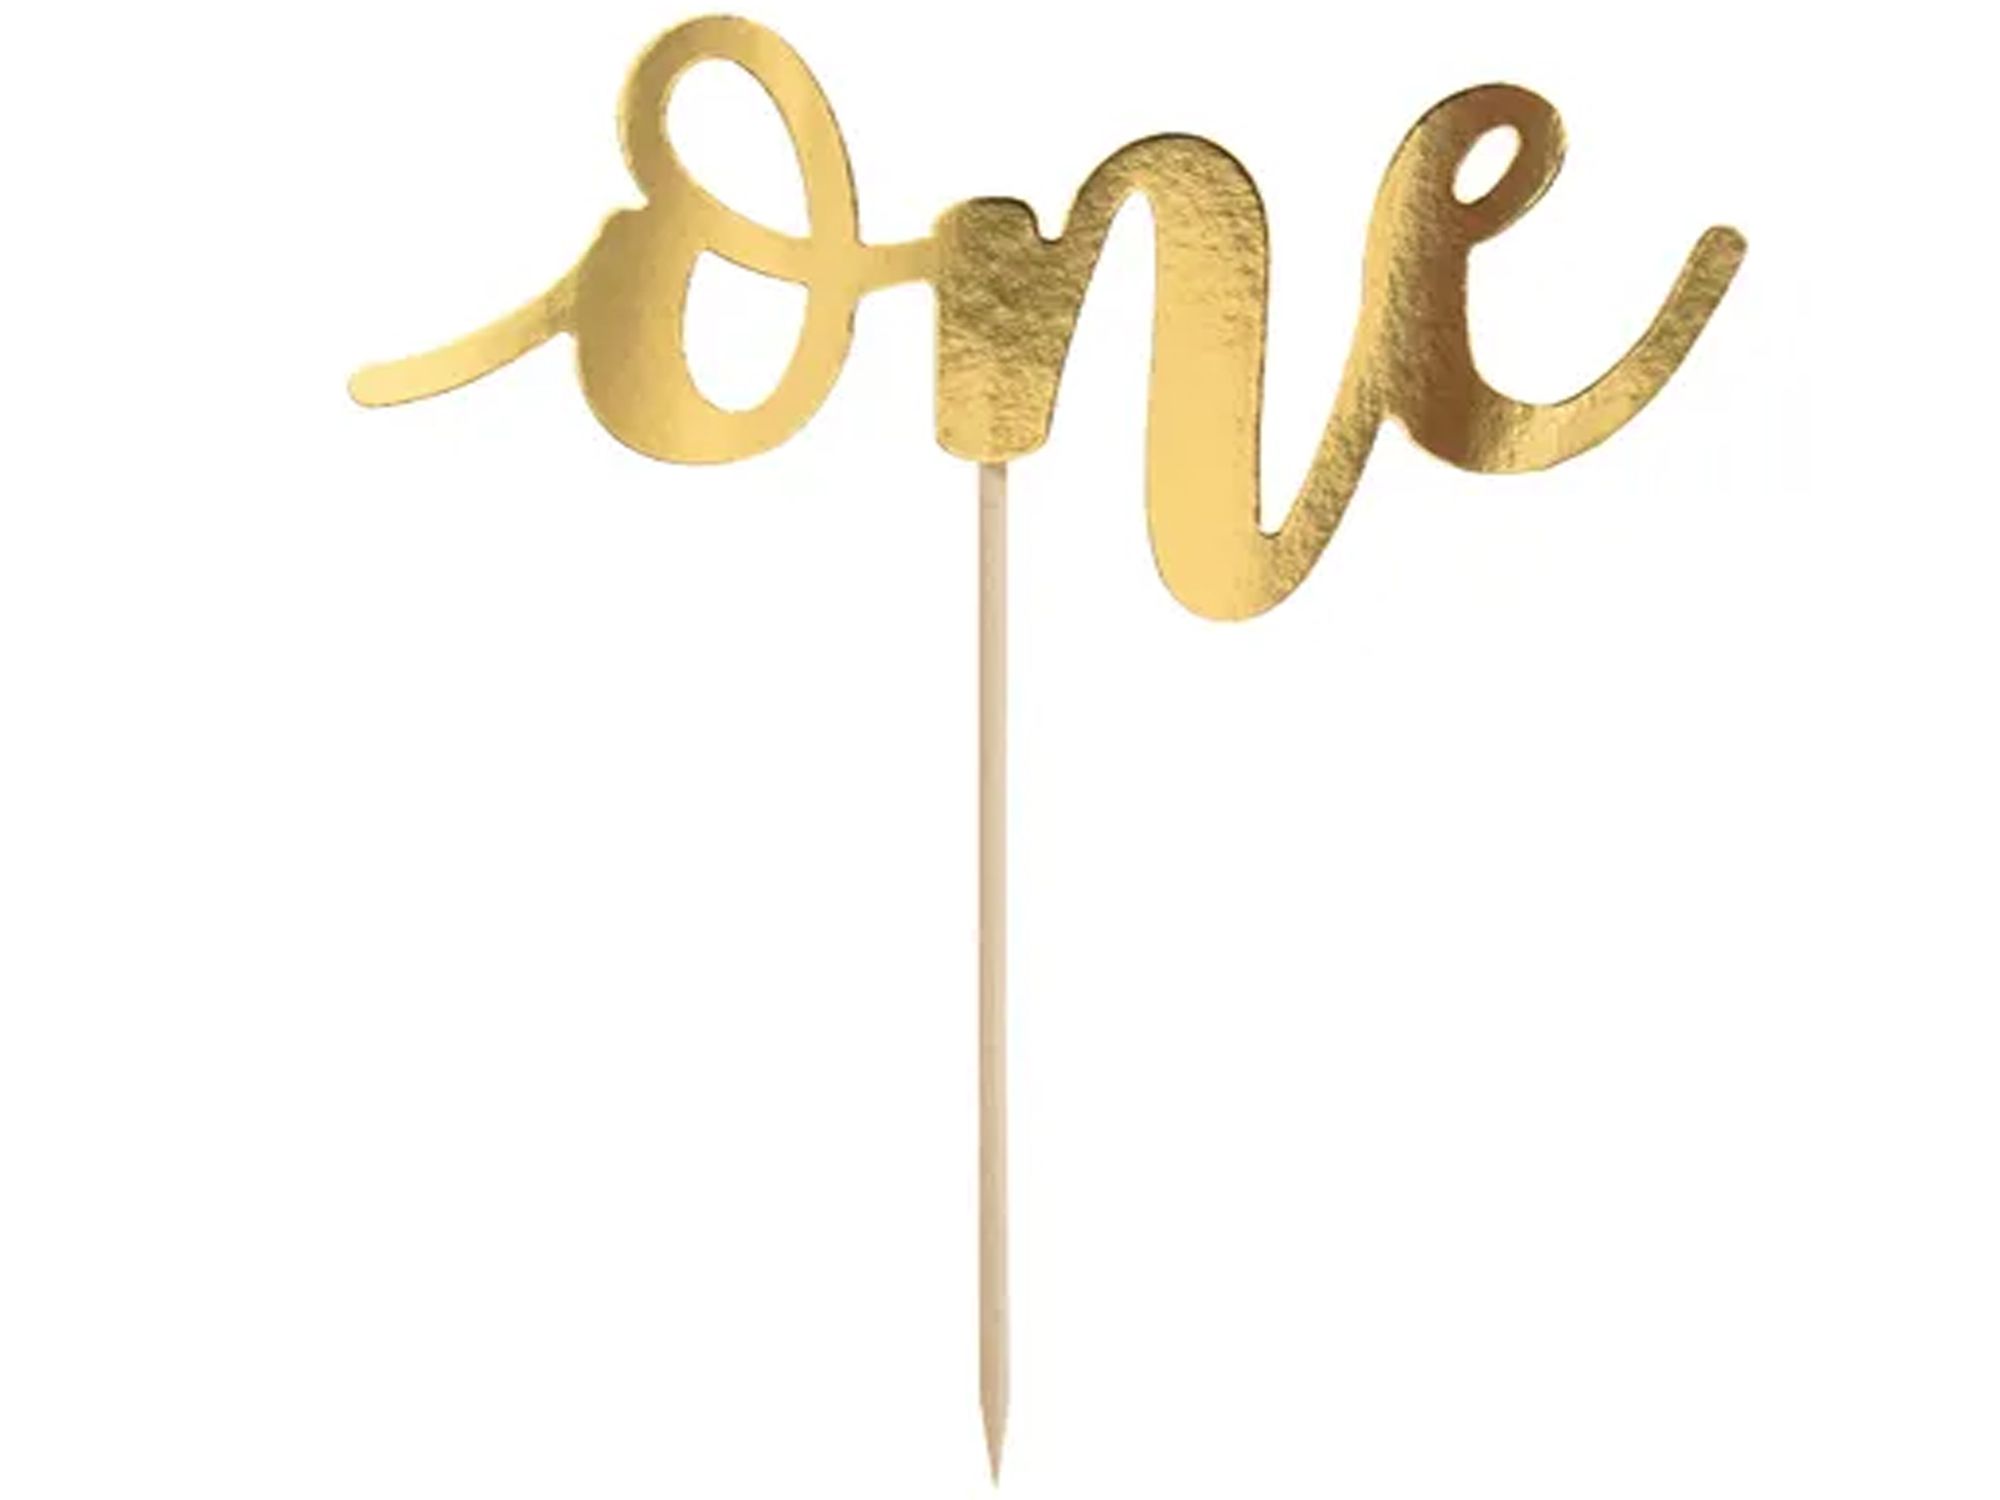 Cake Topper One